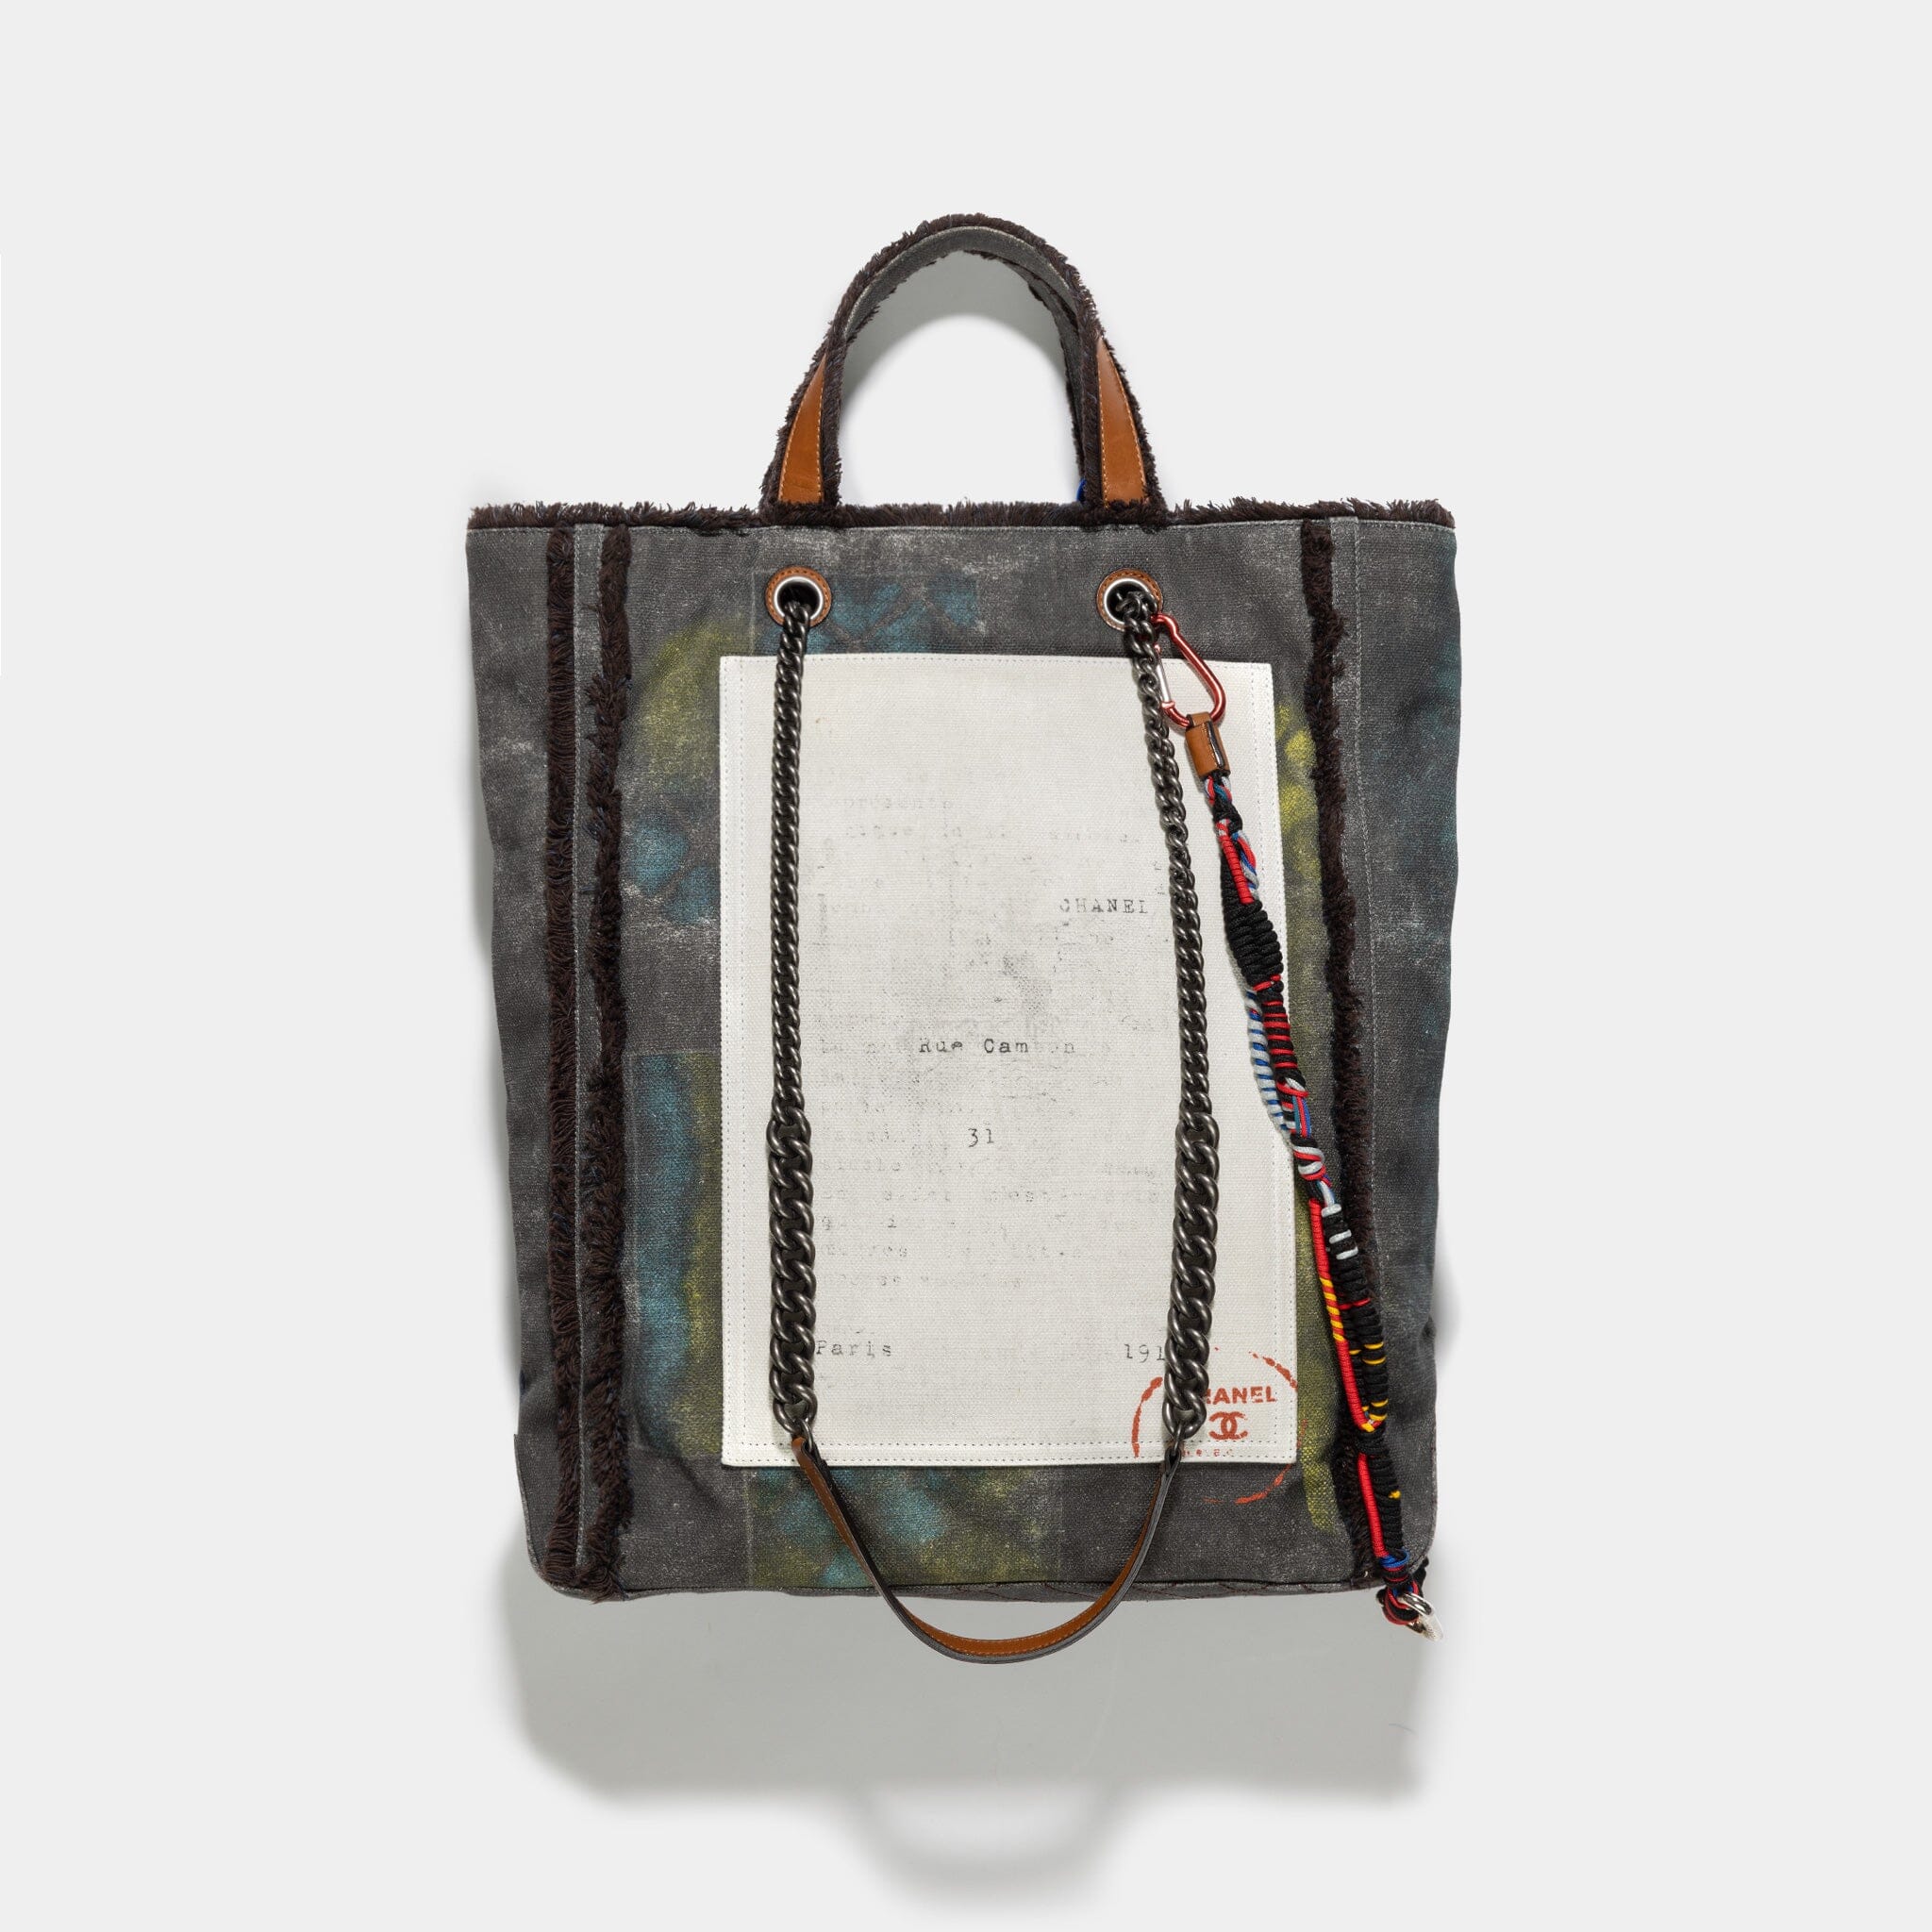 Chanel Sold Out Bag Art Graffiti Canvas Tote